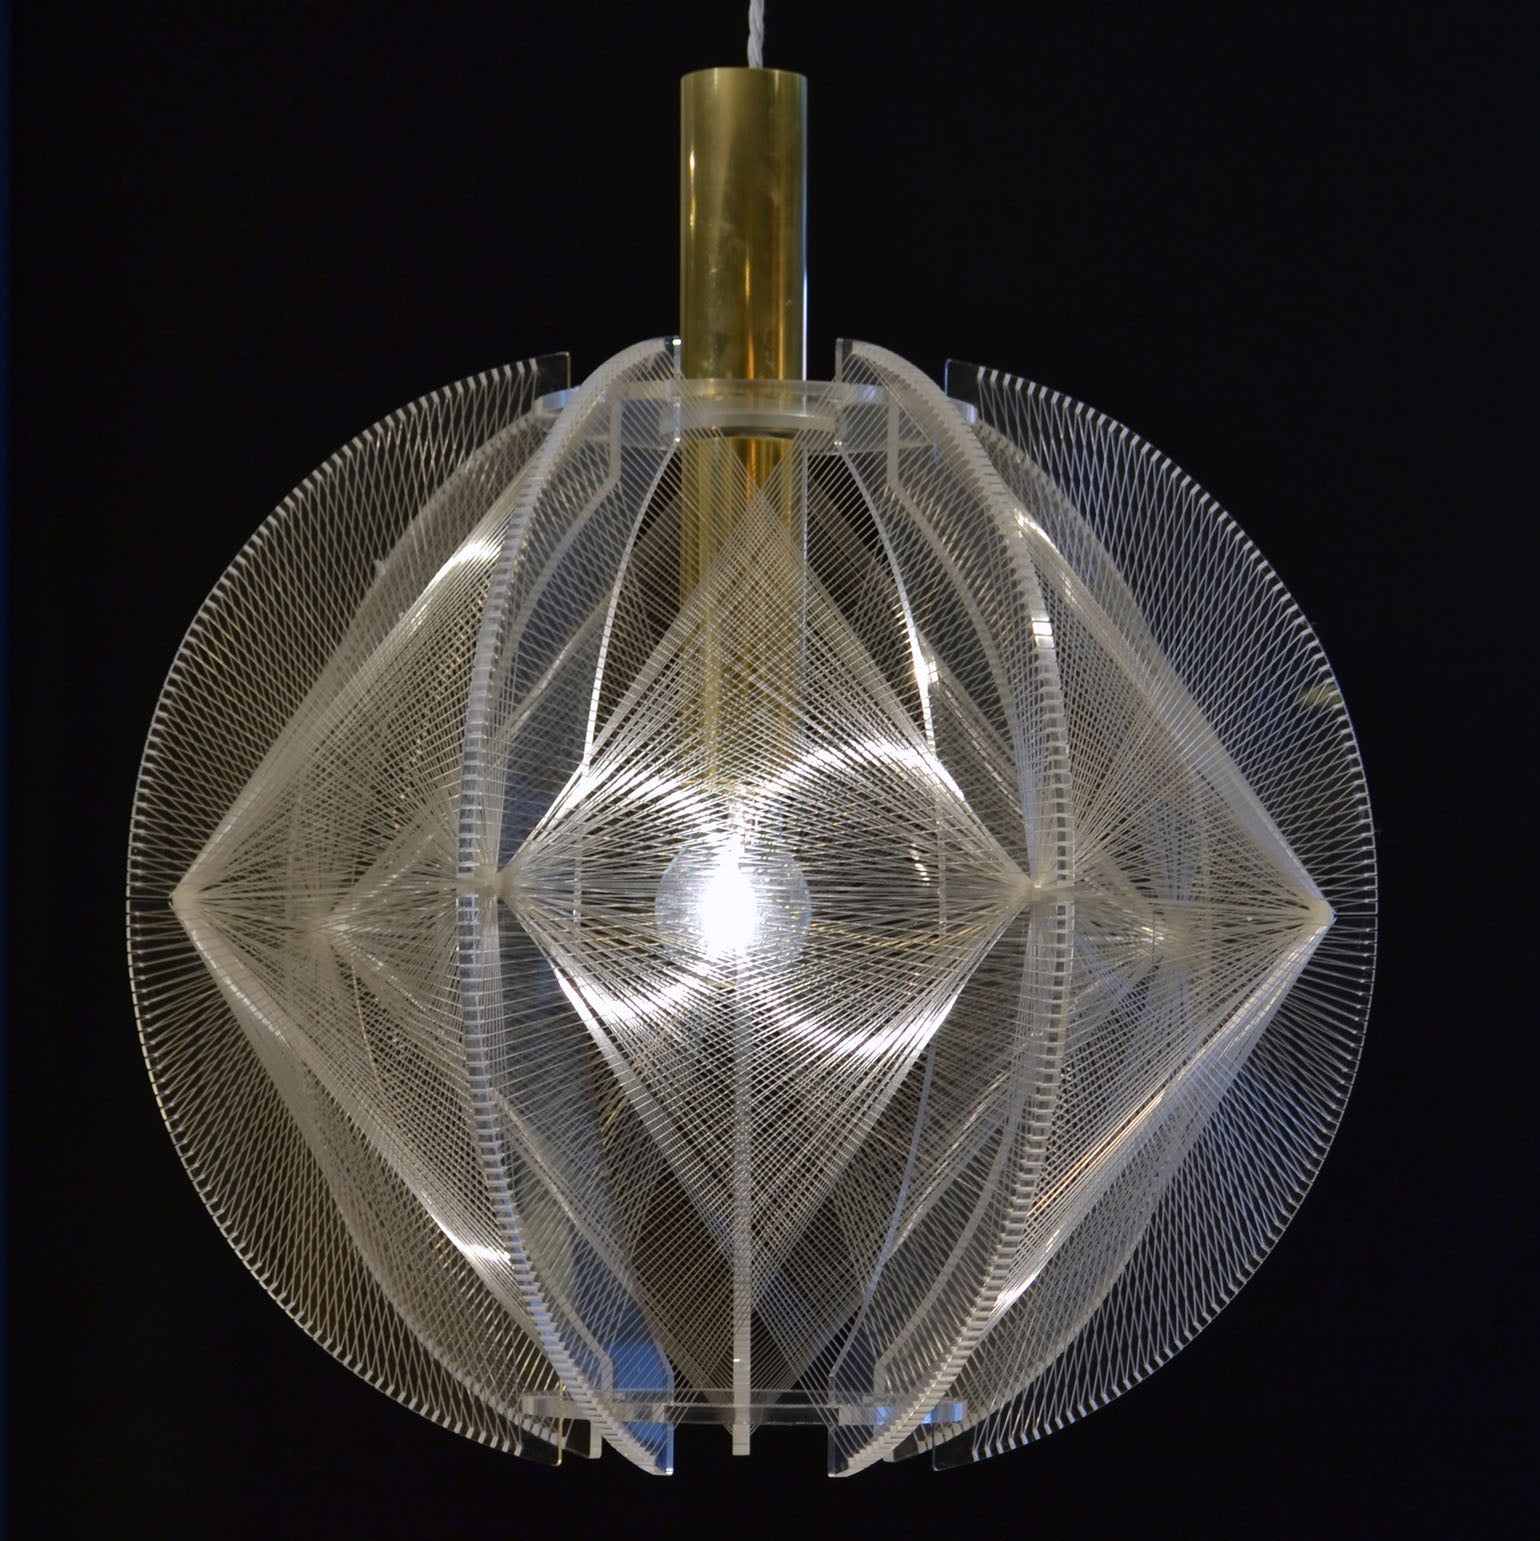 Sculptural lamp made of clear perspex and transparent wire accompanied brass internal fittings by Paul Secon for Sompex. The design is influenced by the pioneer, Avant Garde artist and sculptor Naum Gabo (1890–1977). These lamps are monumental as a